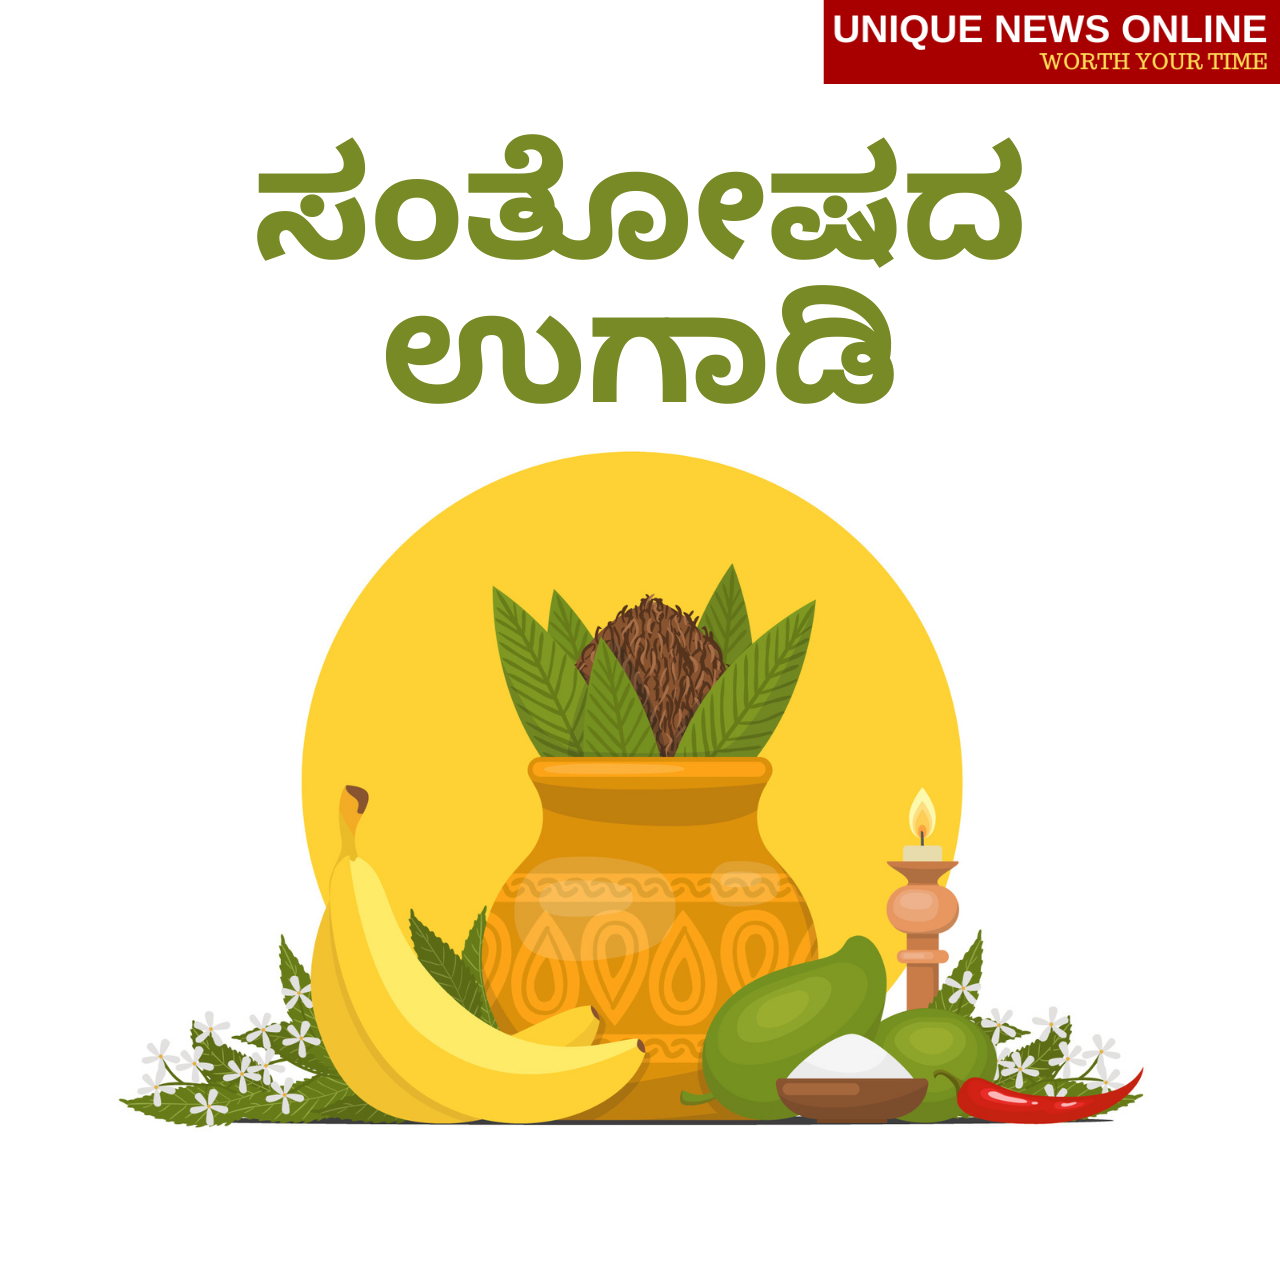 Happy Ugadi 2021 Wishes in Kannada, Greetings, Images, Quotes, and Messages to share on Kannada, and Telugu New Year